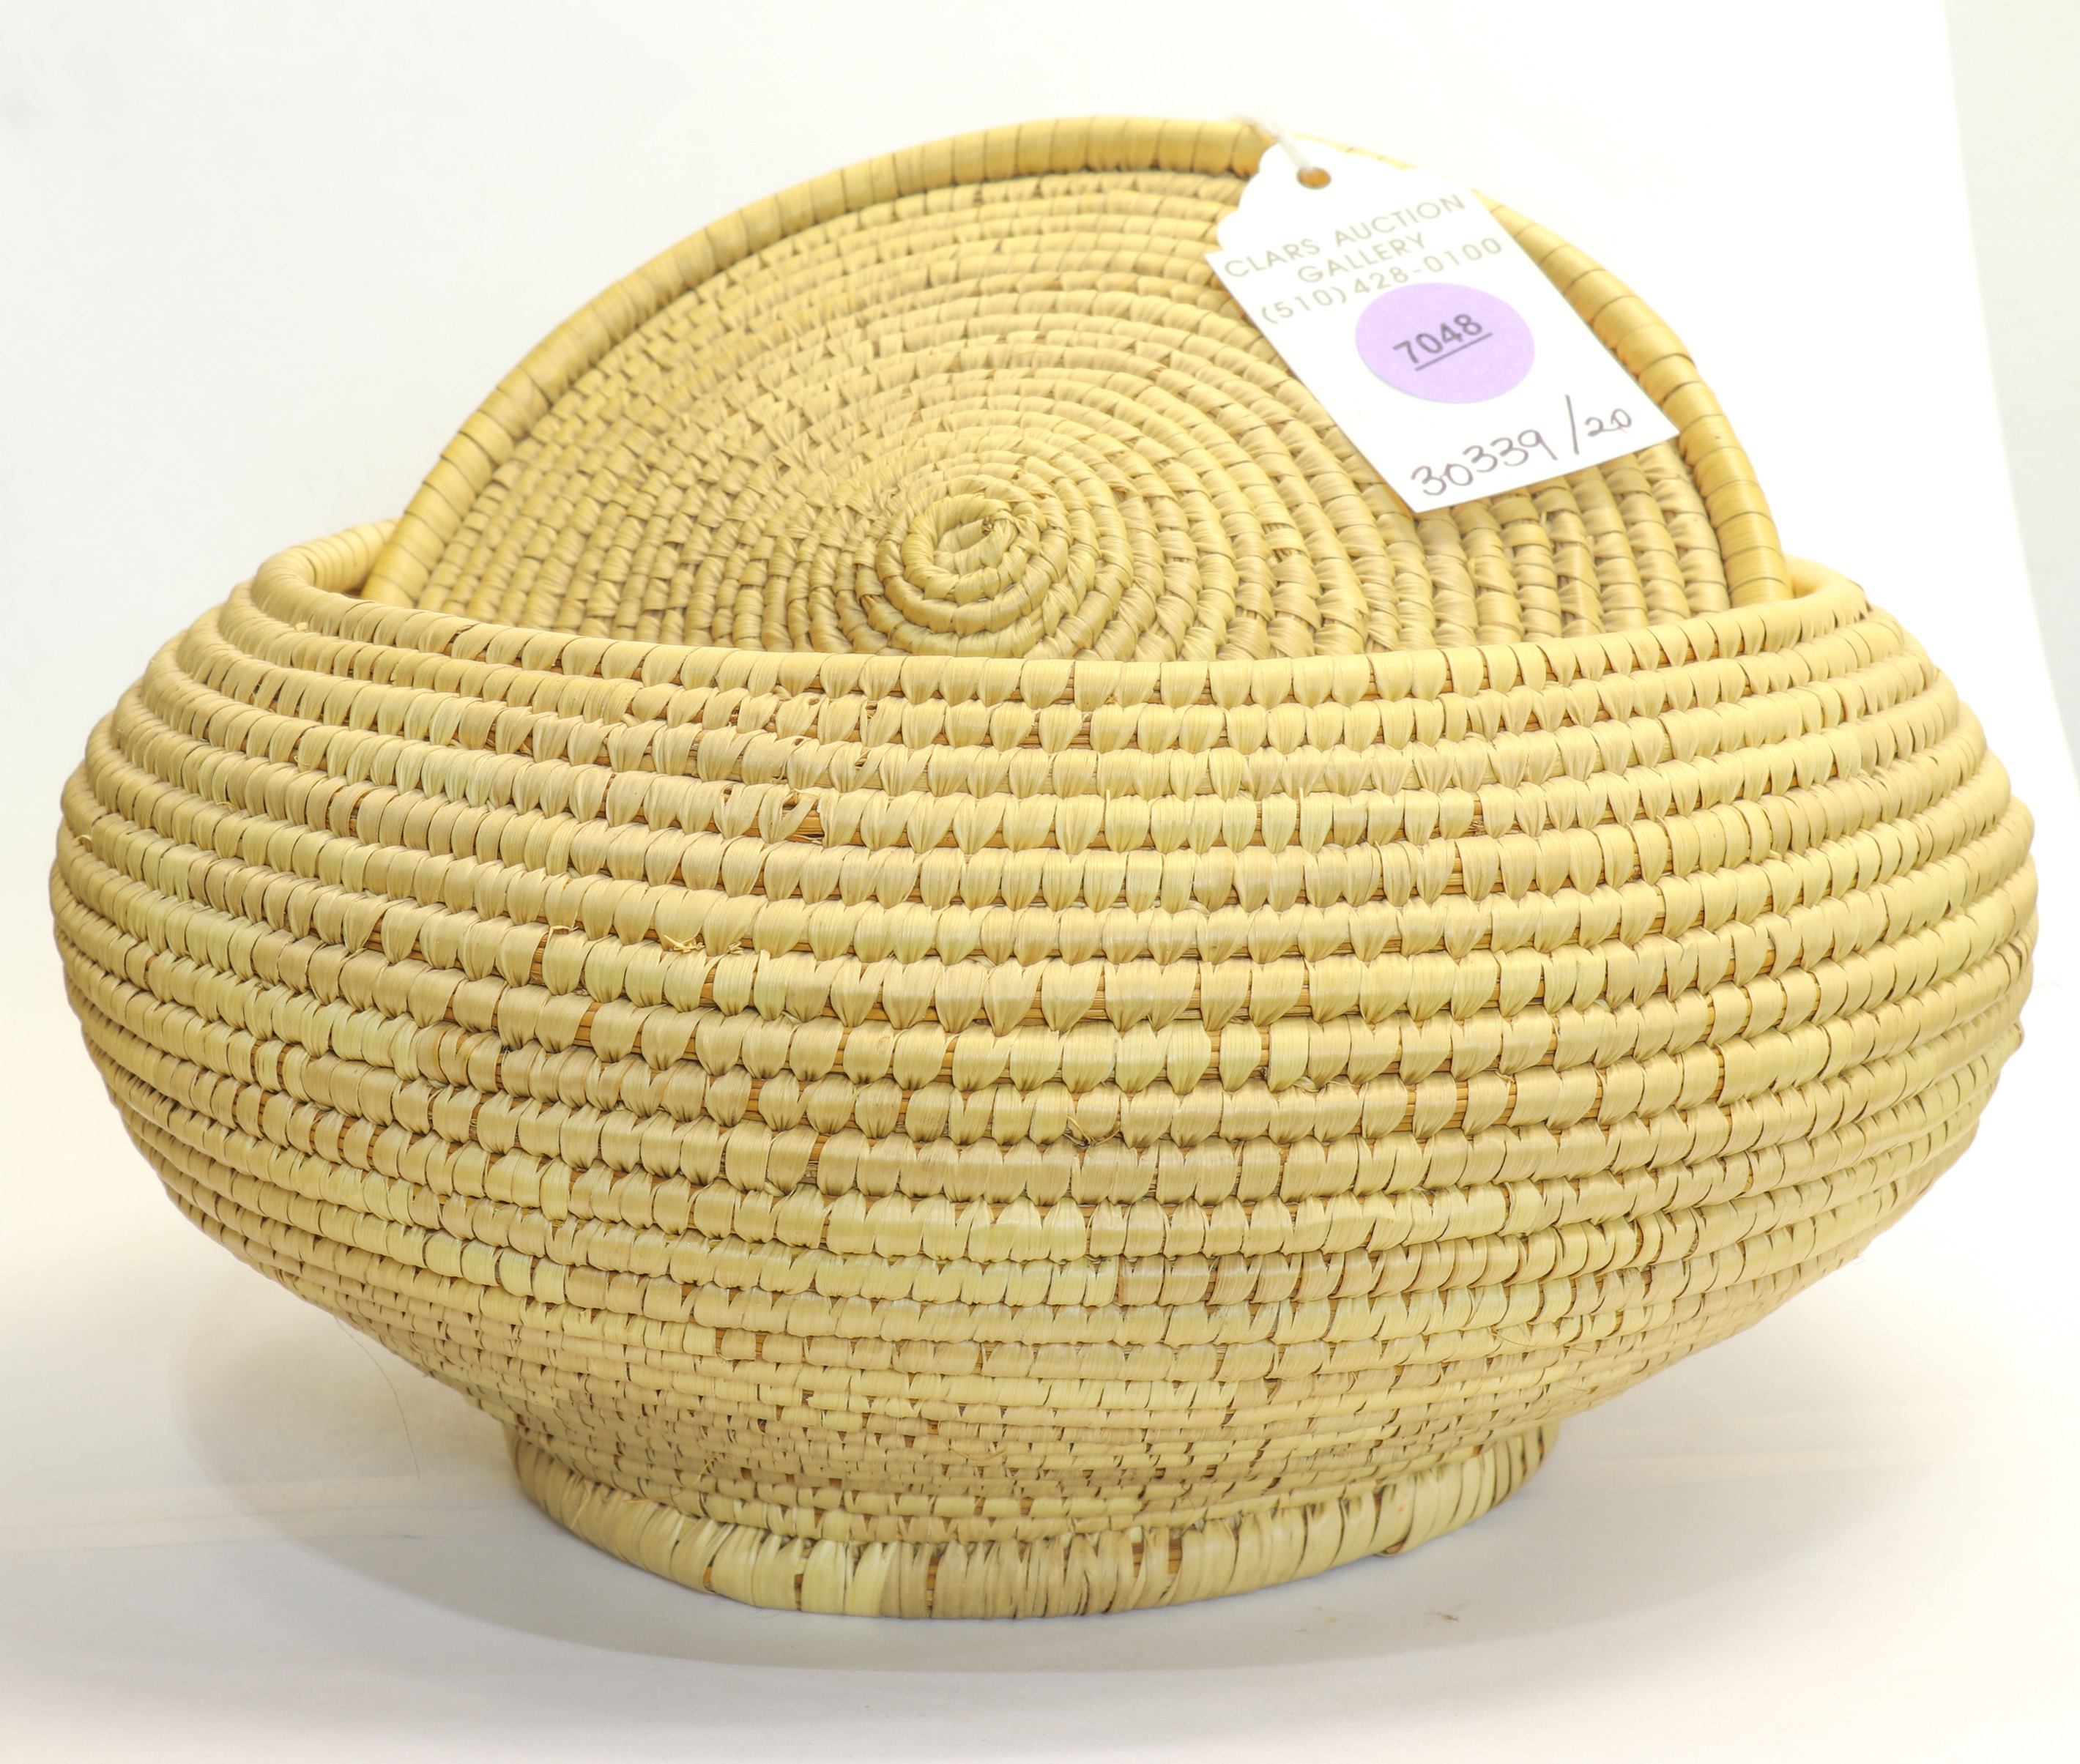 WOVEN BASKET WITH COVER Woven basket